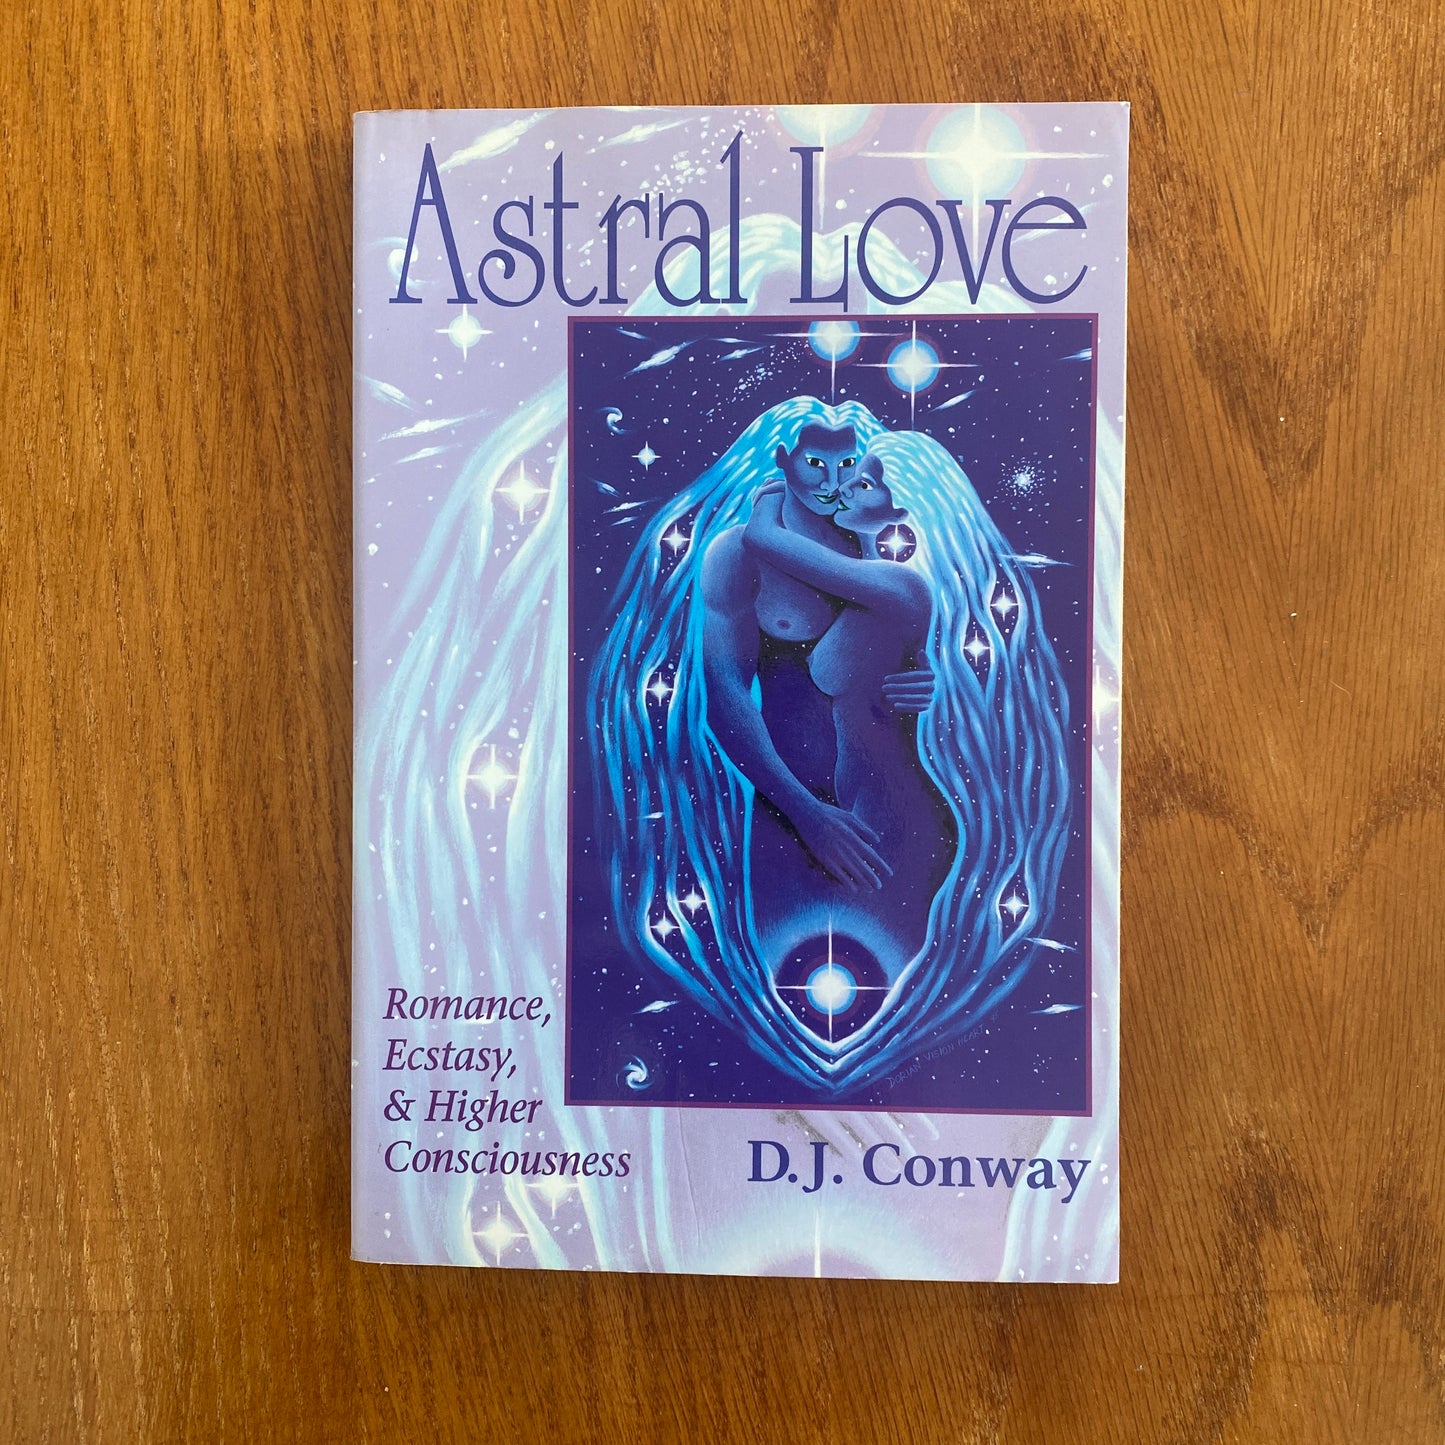 Astral Love Romance, Ecstasy, & Higher Consciousness - D.J. Conway